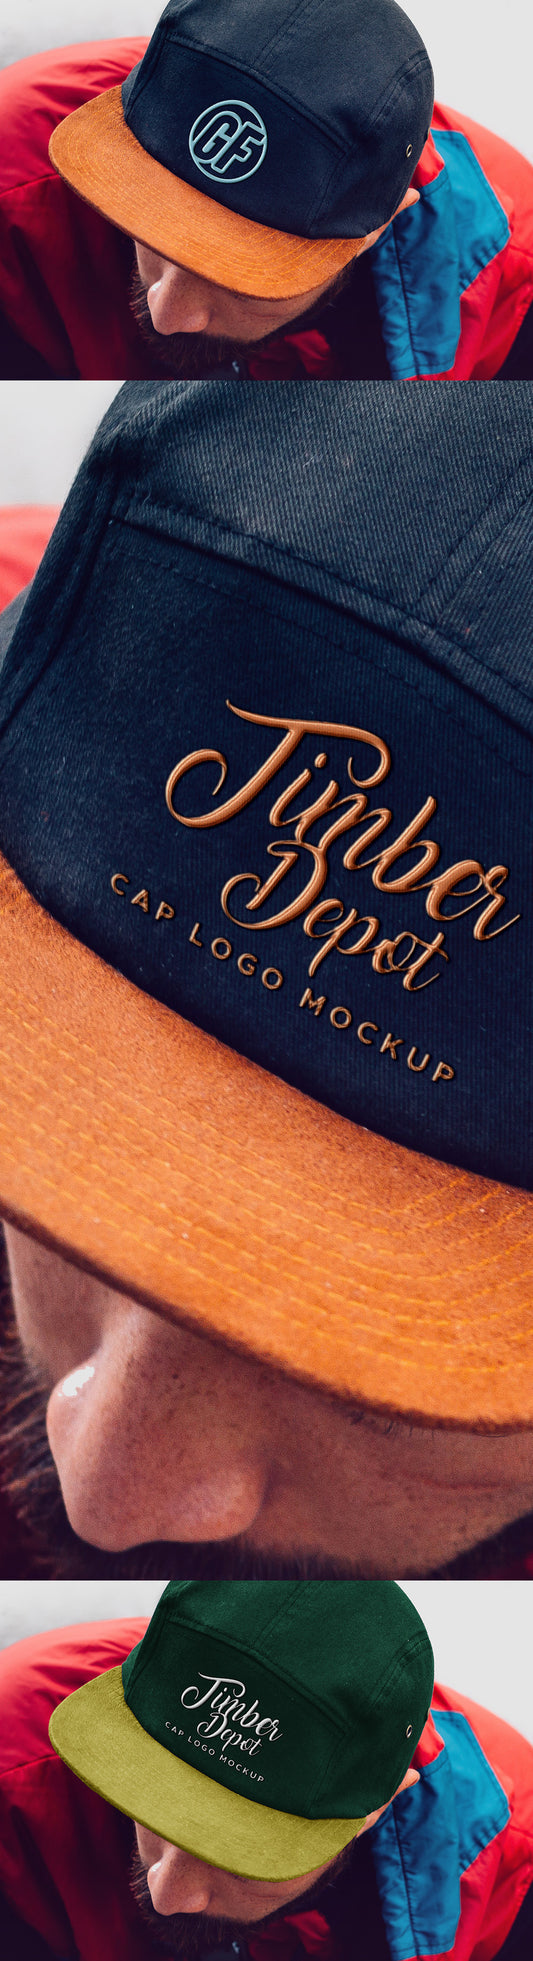 Free Cap With Realistic Embroidered Logo Mockup